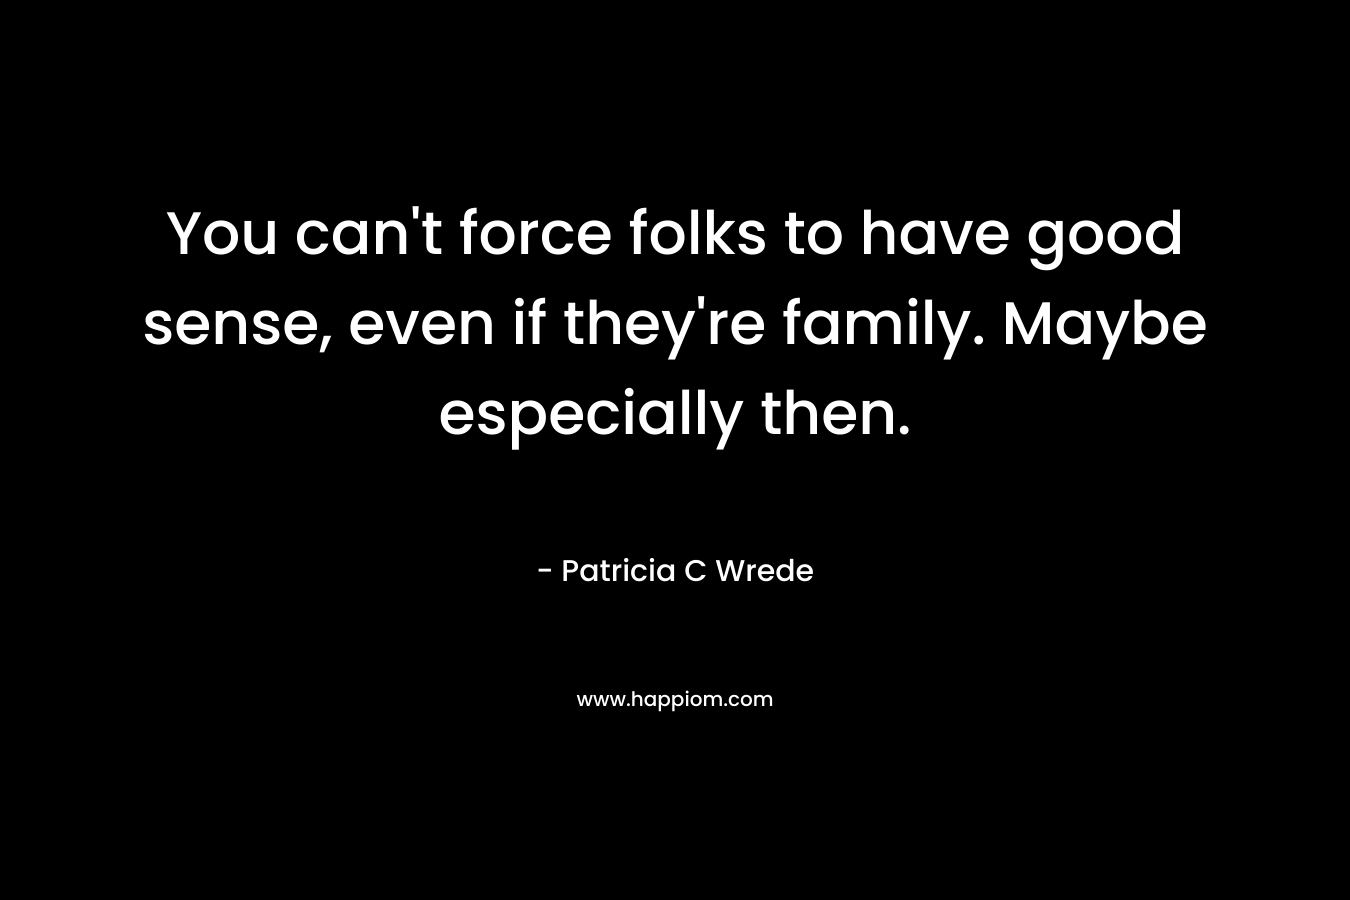 You can’t force folks to have good sense, even if they’re family. Maybe especially then. – Patricia C Wrede